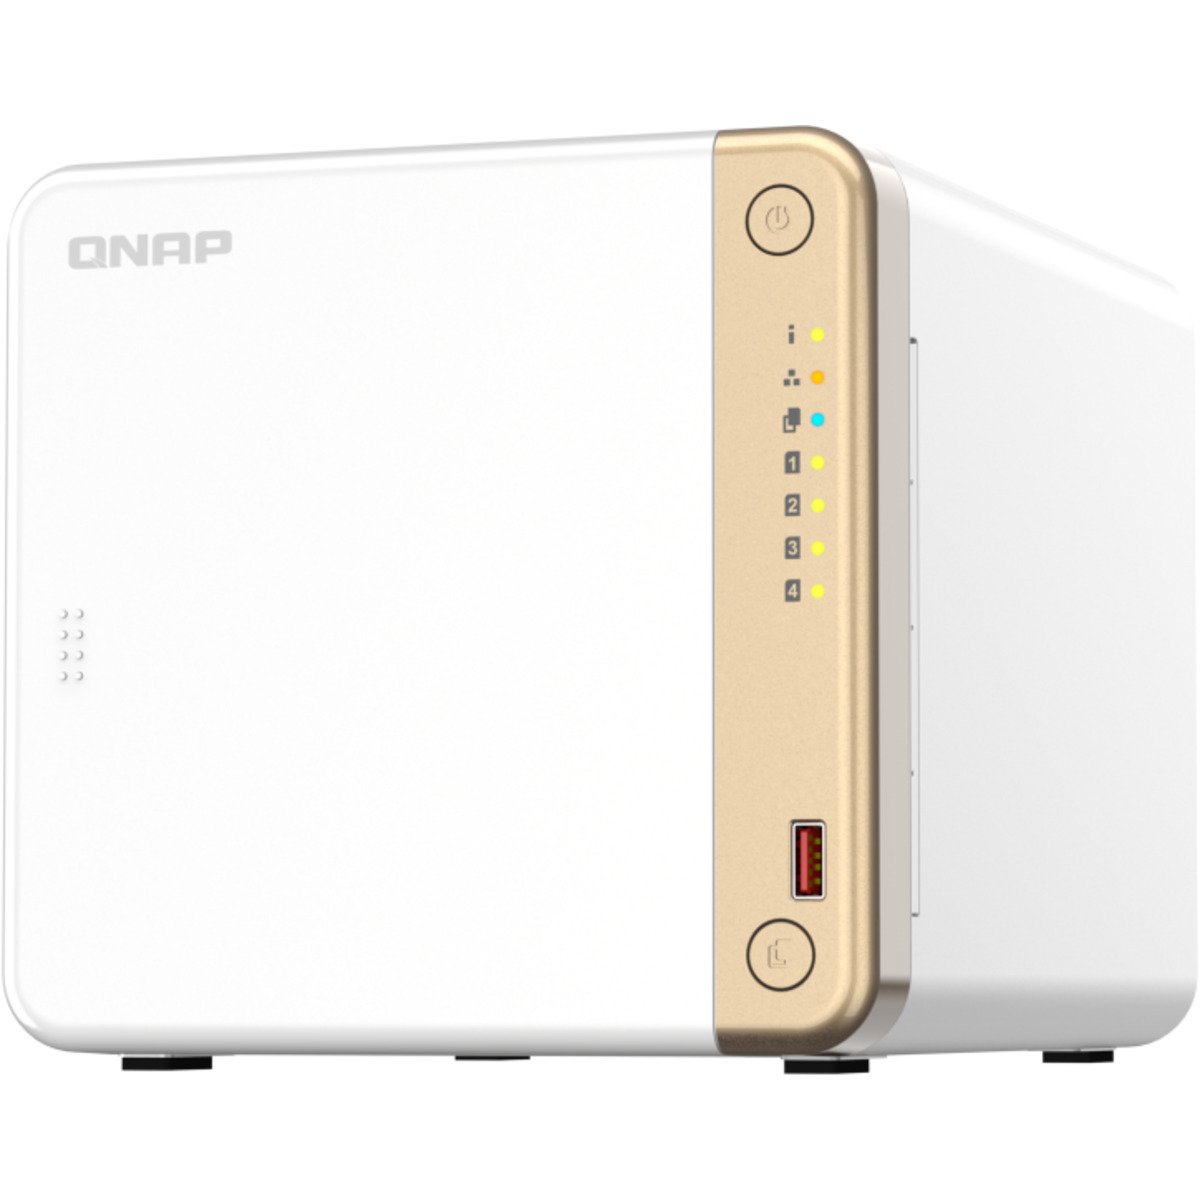 QNAP TS-462 32tb 4-Bay Desktop Multimedia / Power User / Business NAS - Network Attached Storage Device 4x8tb Seagate EXOS 7E10 ST8000NM017B 3.5 7200rpm SATA 6Gb/s HDD ENTERPRISE Class Drives Installed - Burn-In Tested - ON SALE TS-462